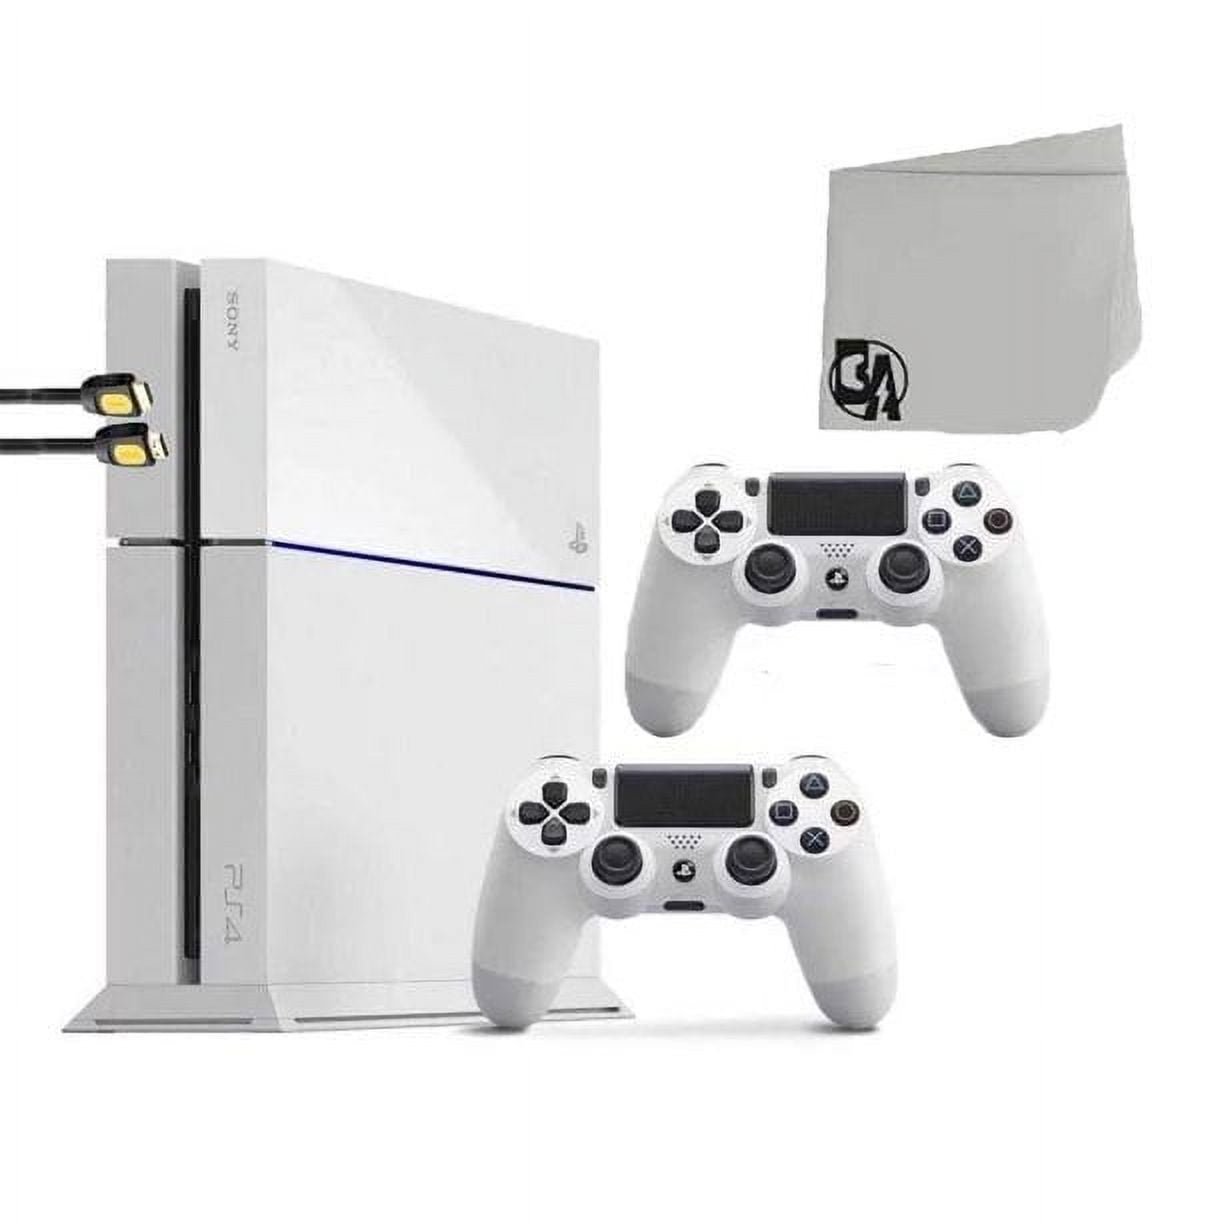 Sony PlayStation 4 500GB Gaming Console White 2 Controller Included BOLT  AXTION Bundle Refurbished - Walmart.com